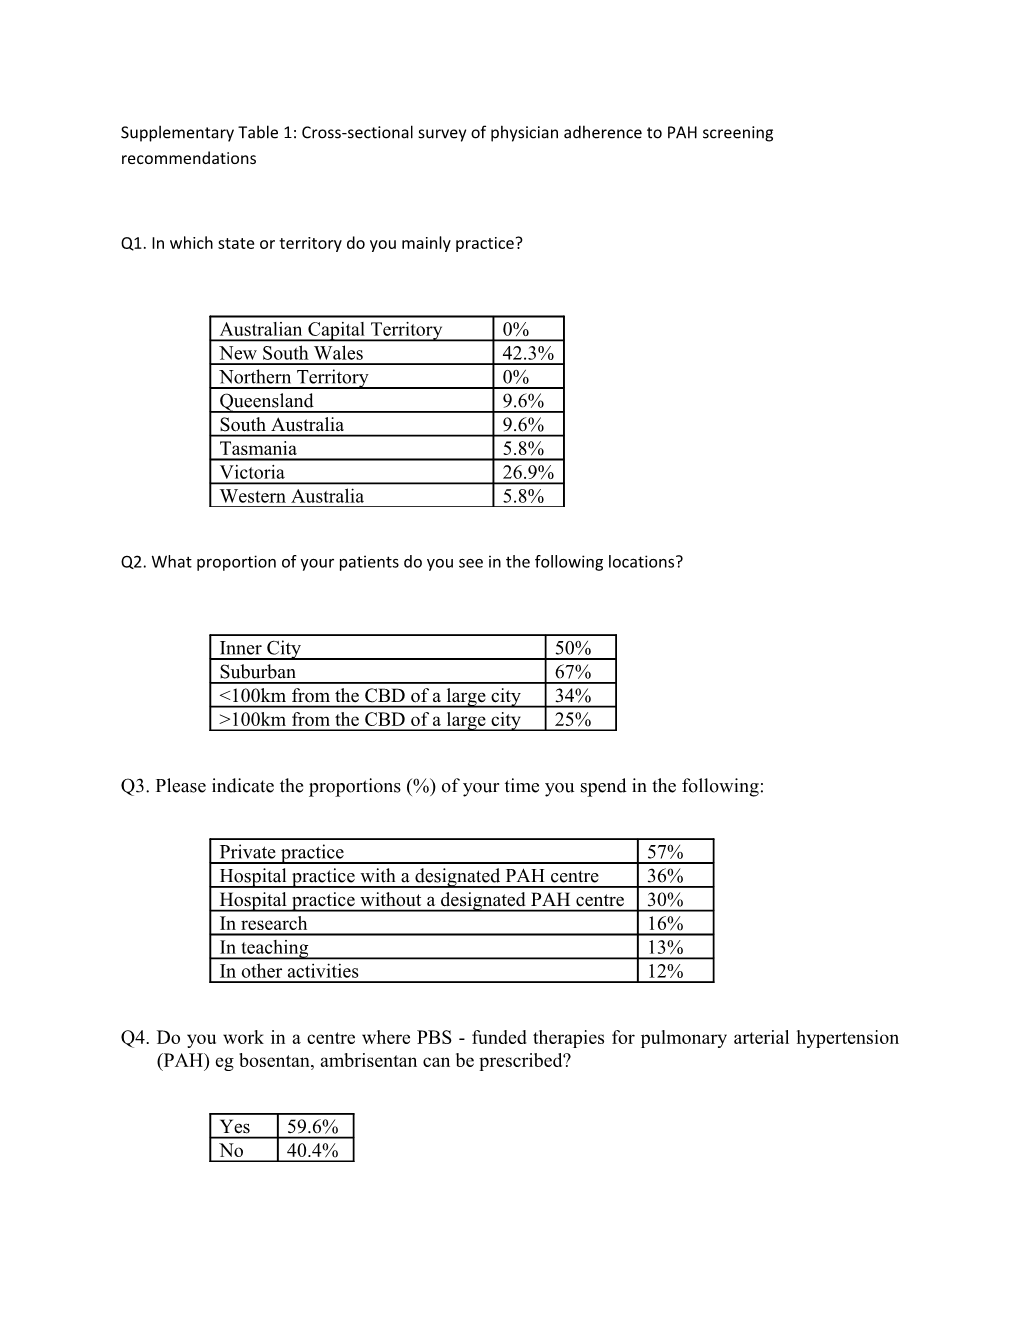 Supplementary Table 1: Cross-Sectional Survey of Physician Adherence to PAH Screening